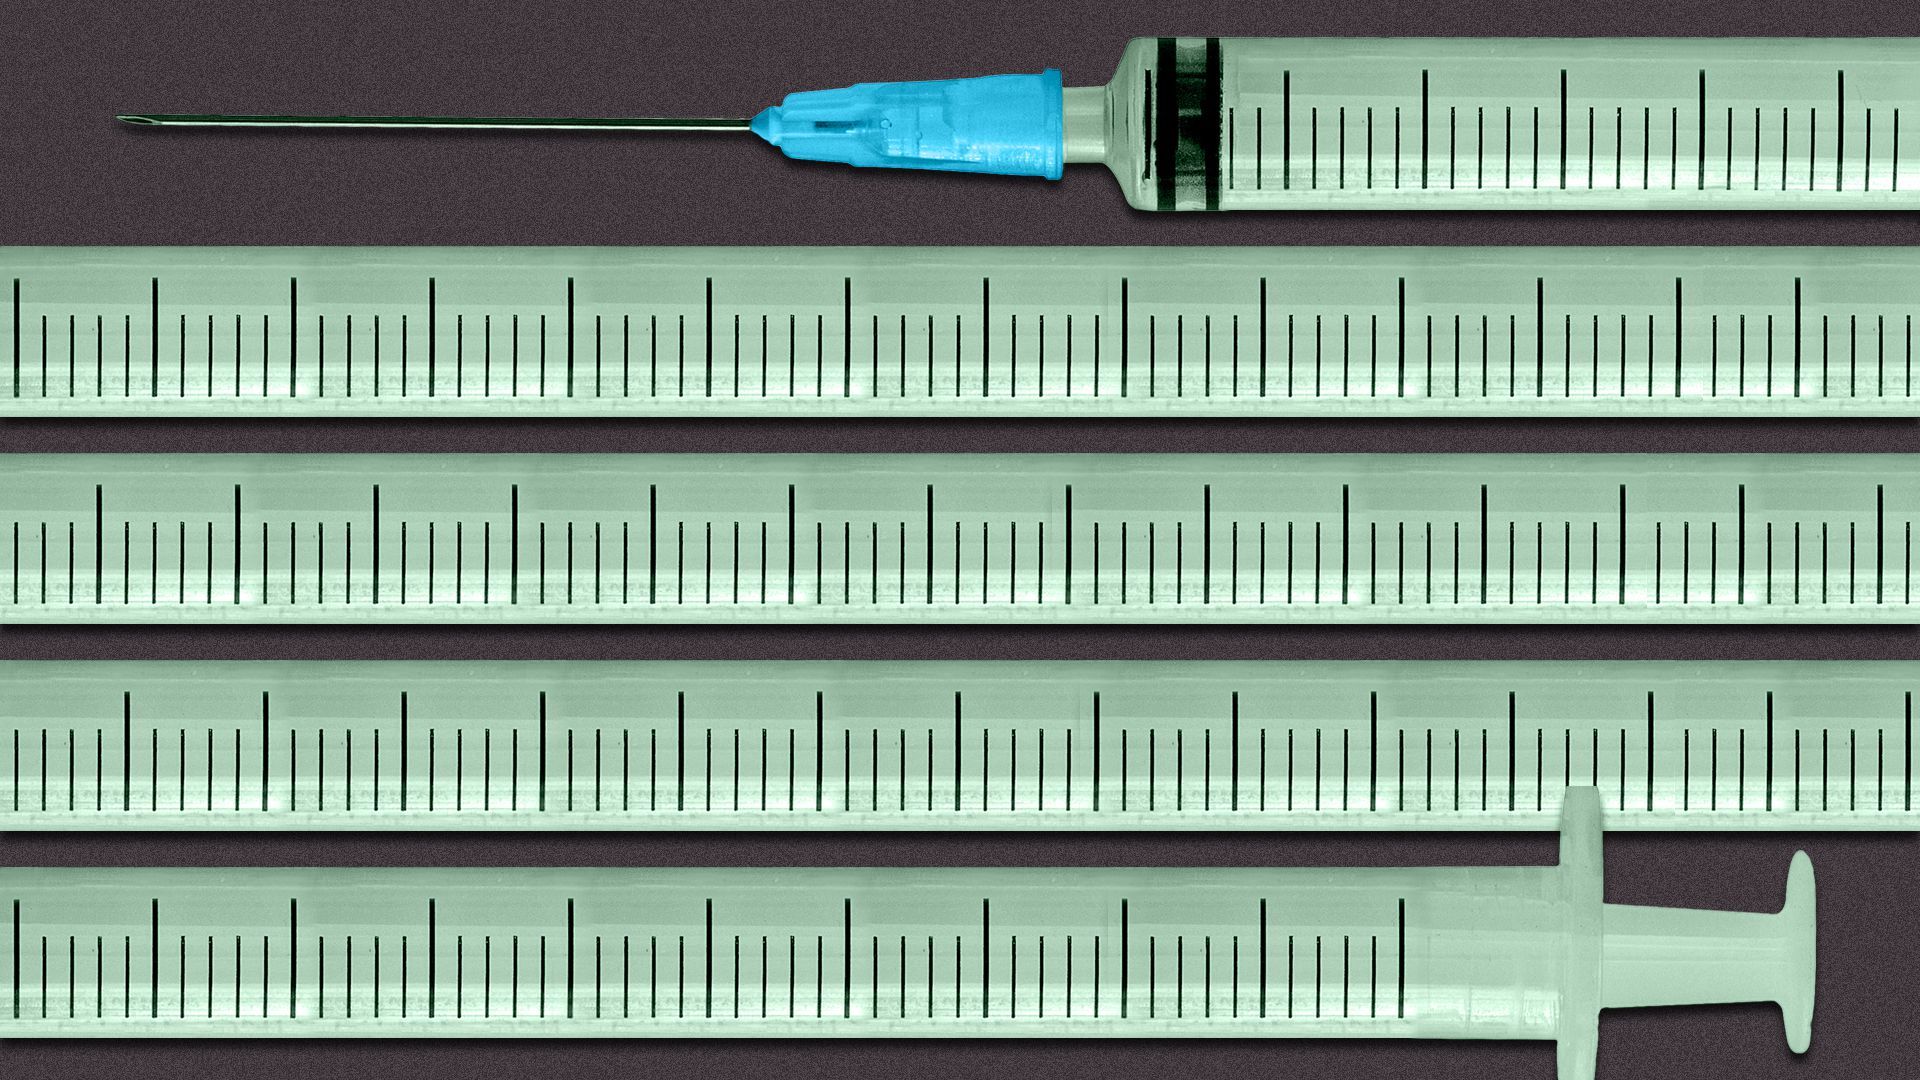 Illustration of an extra-long syringe, filling up the entirety of the image.